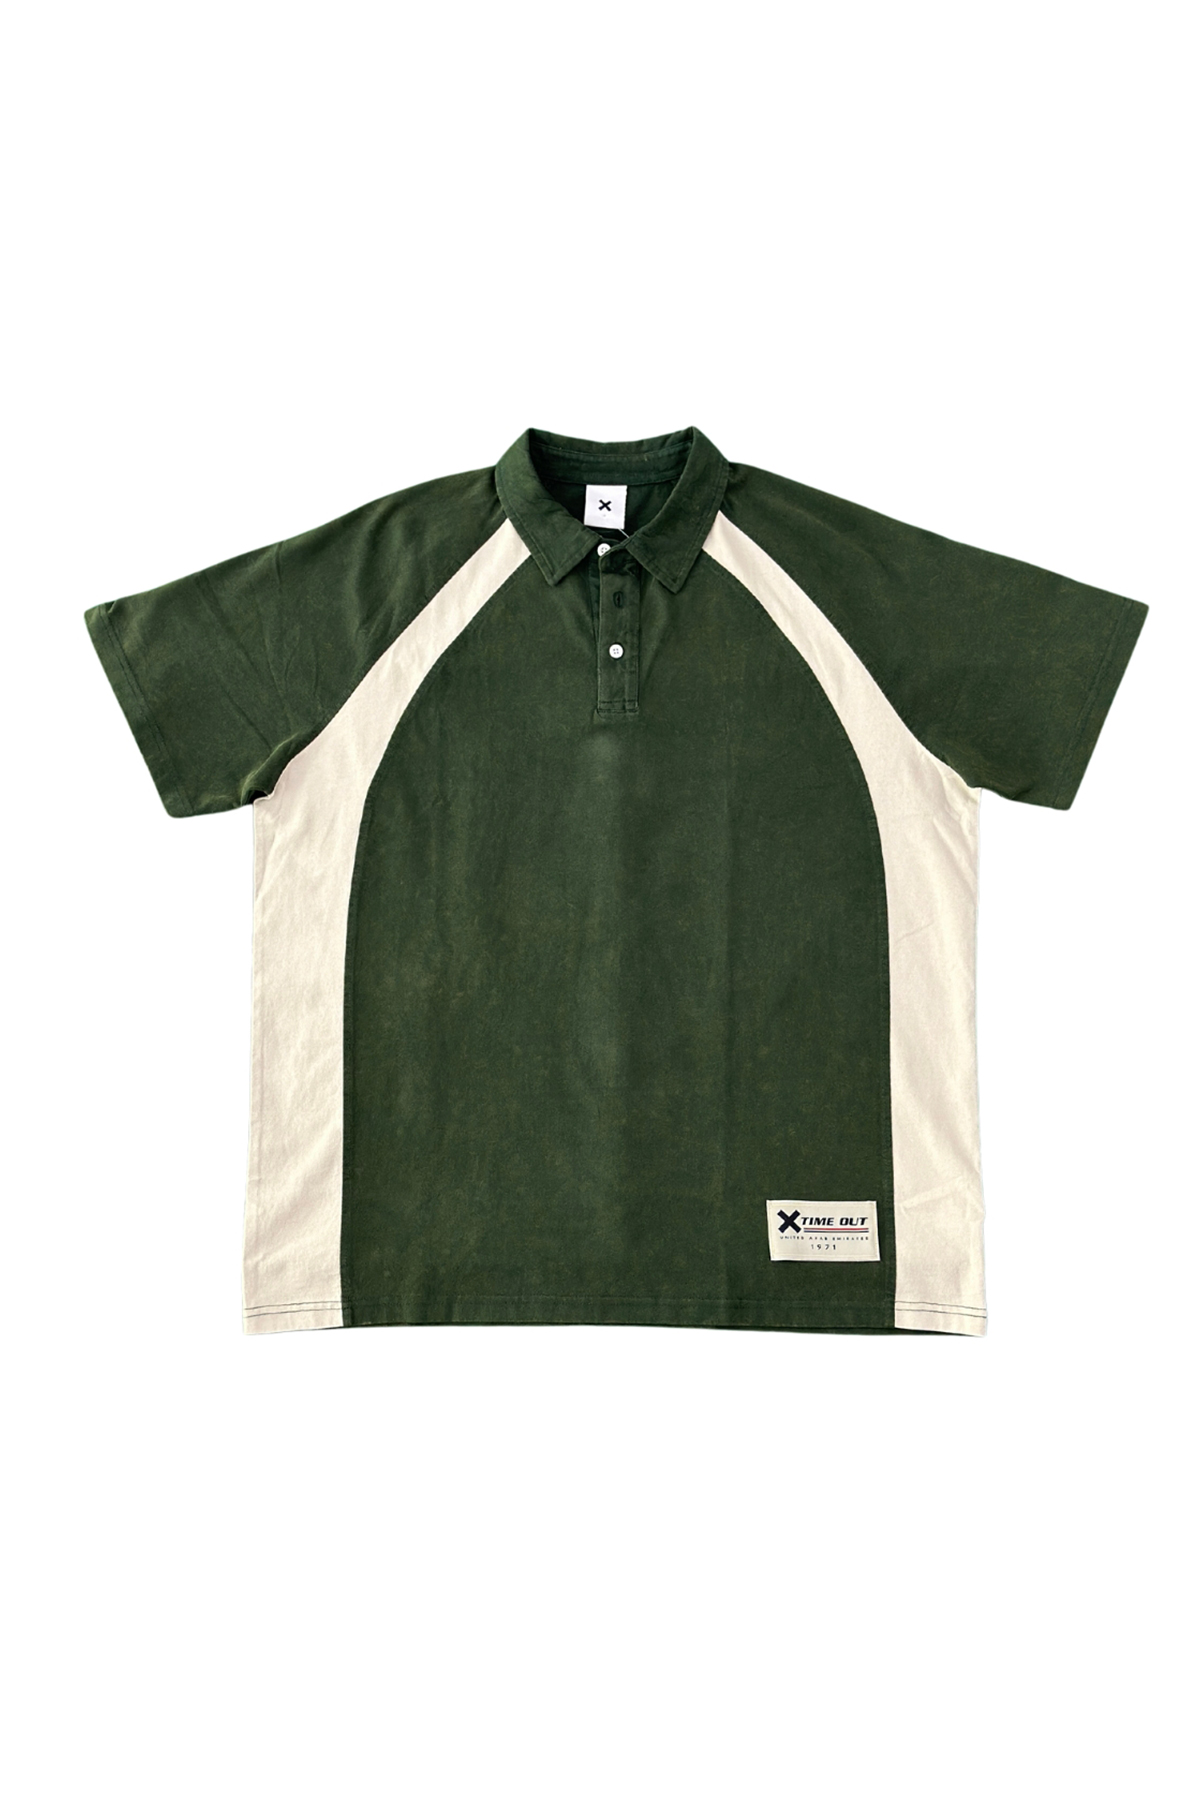 Time-Out-X-Unisex-Short-Sleeve-Rugby-Shirt-green-front